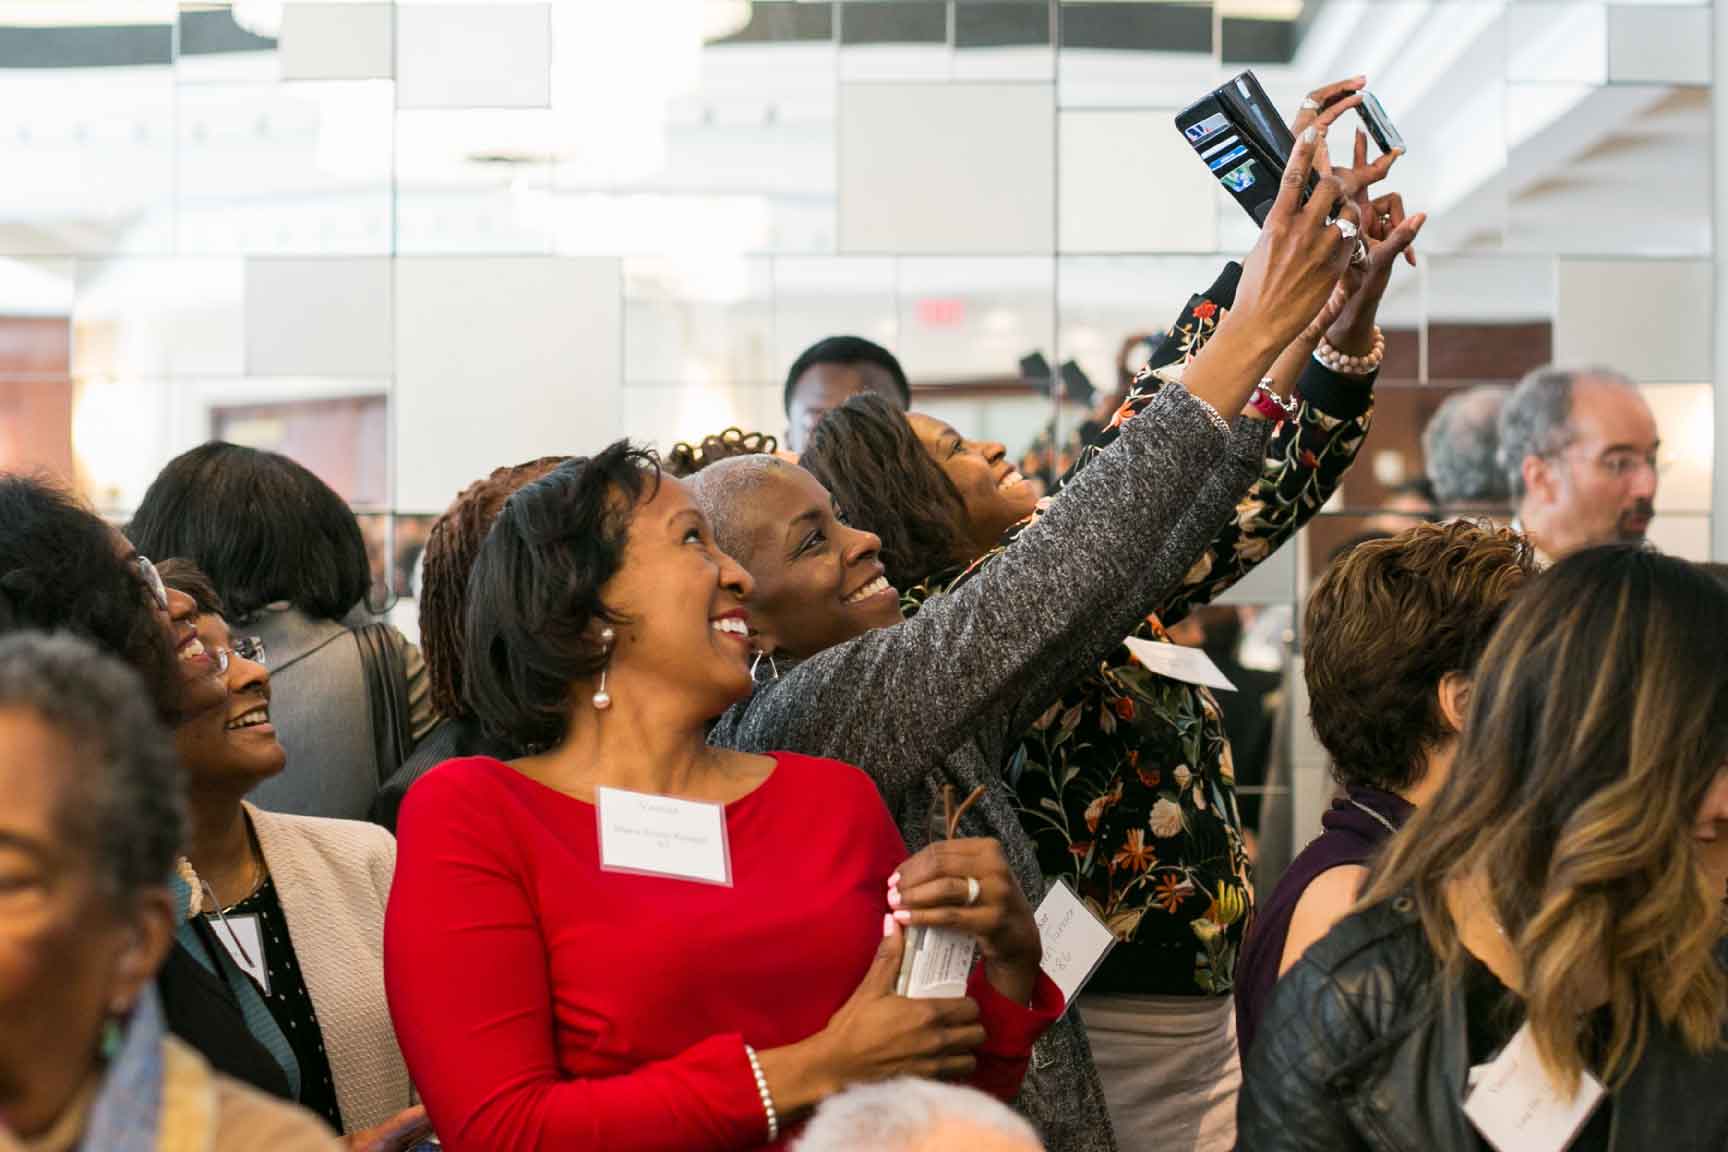 Group of people stand next to each other smiling, taking a selfie at a crowded event.